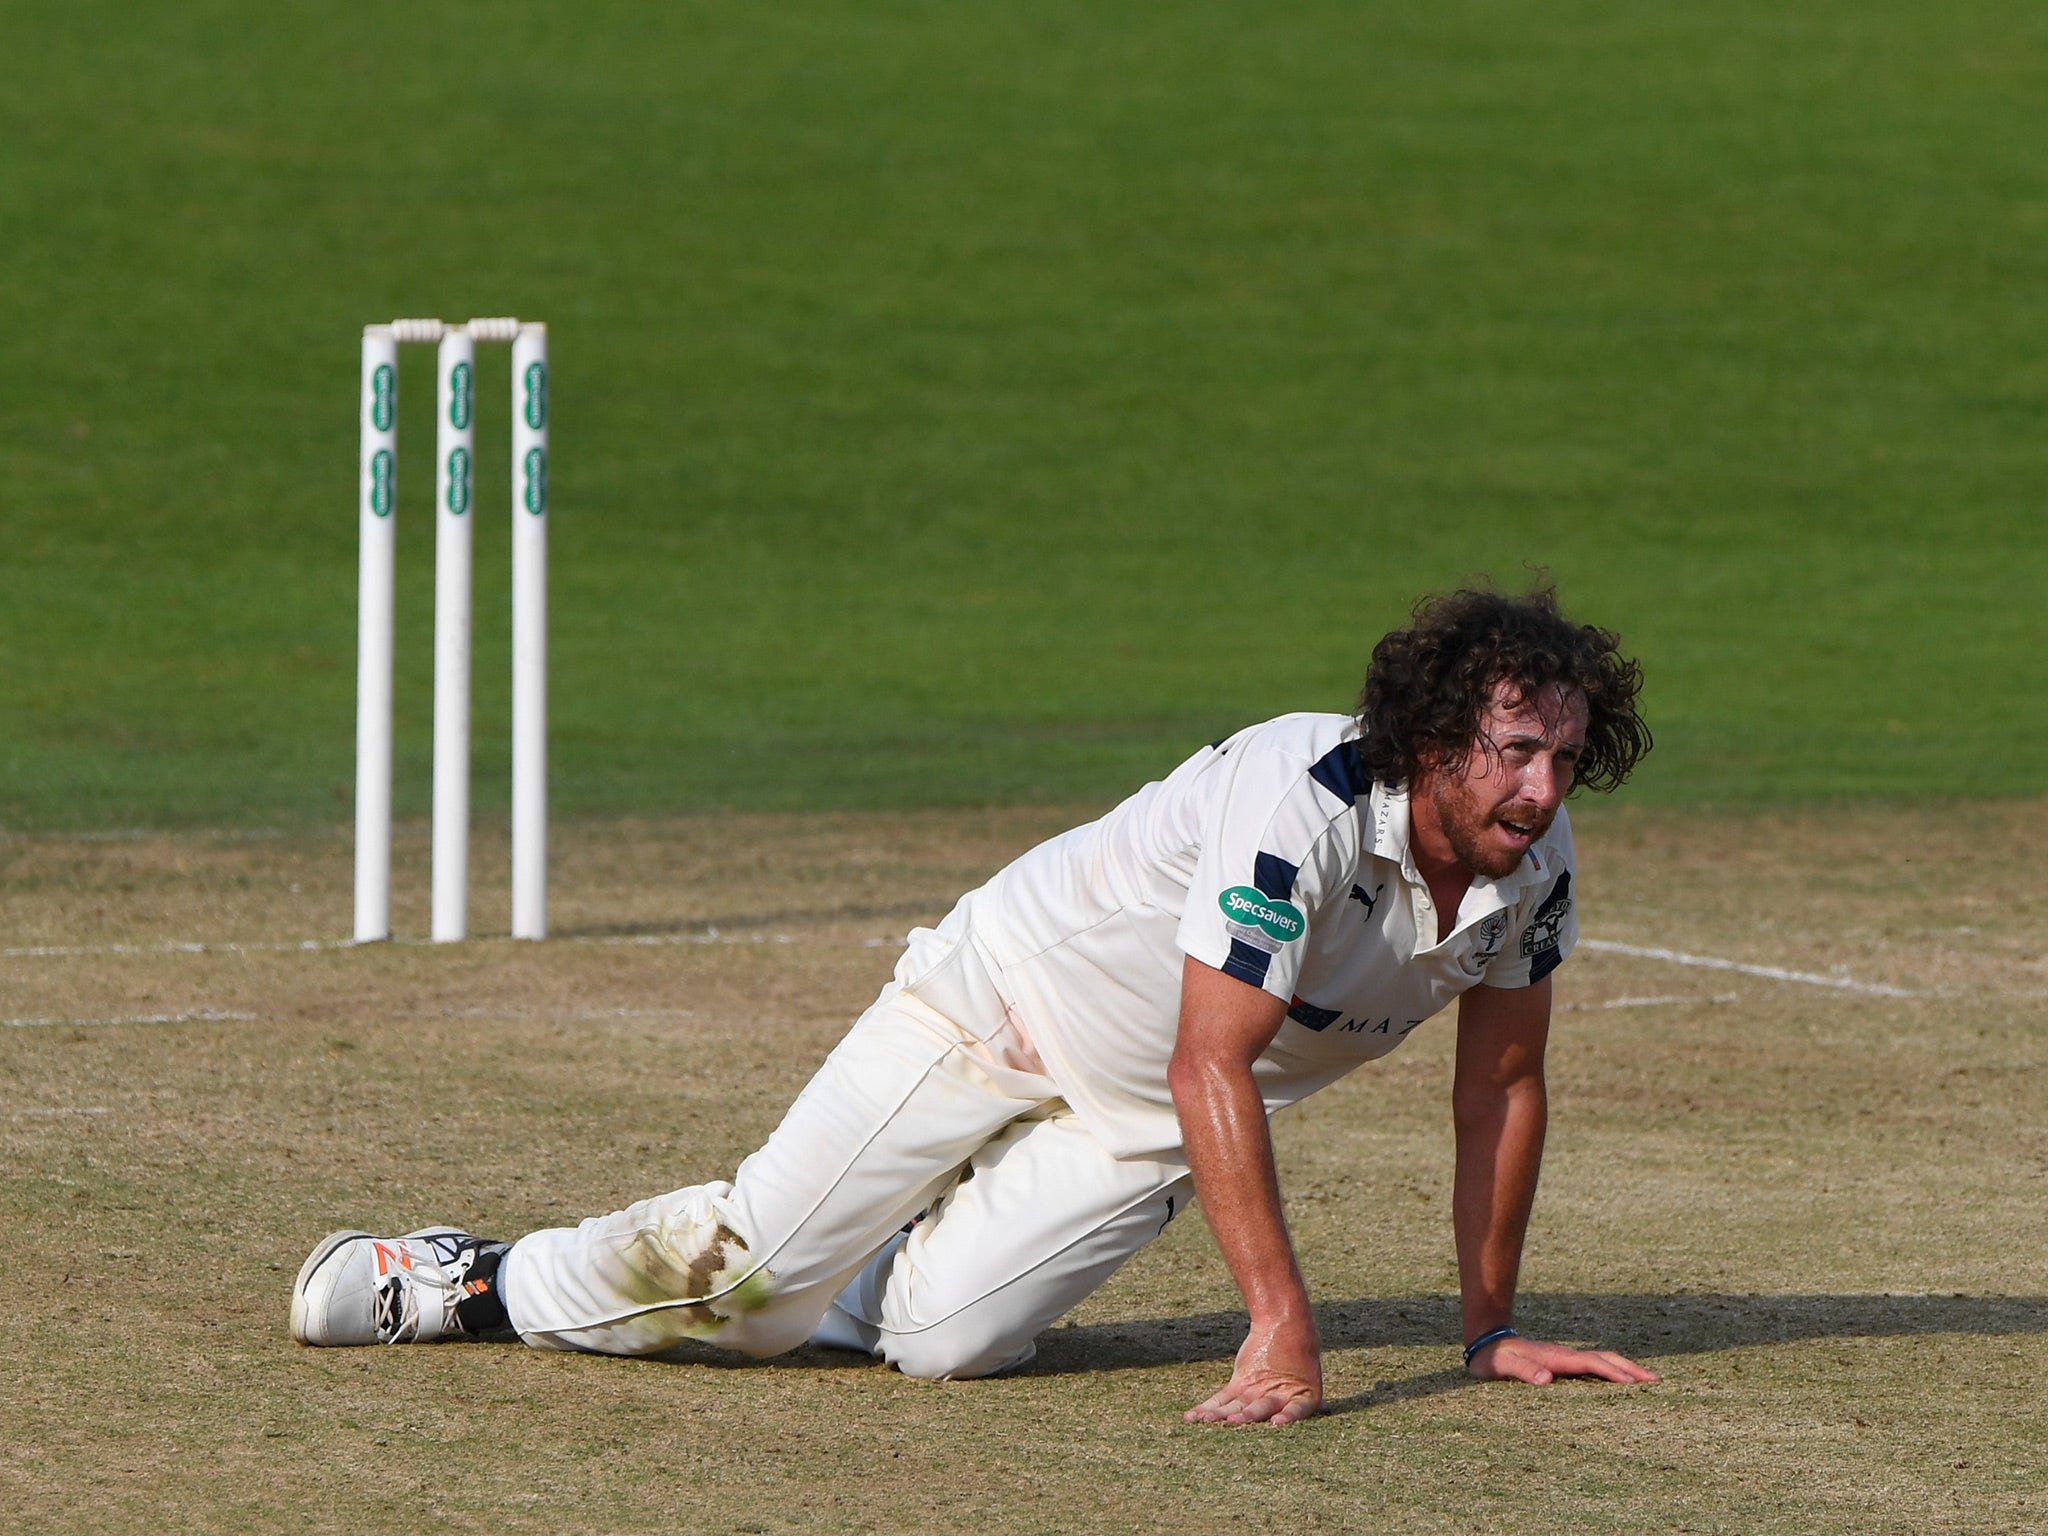 Ryan Sidebottom will head into his final campaign with more than 1,000 career wickets to his name